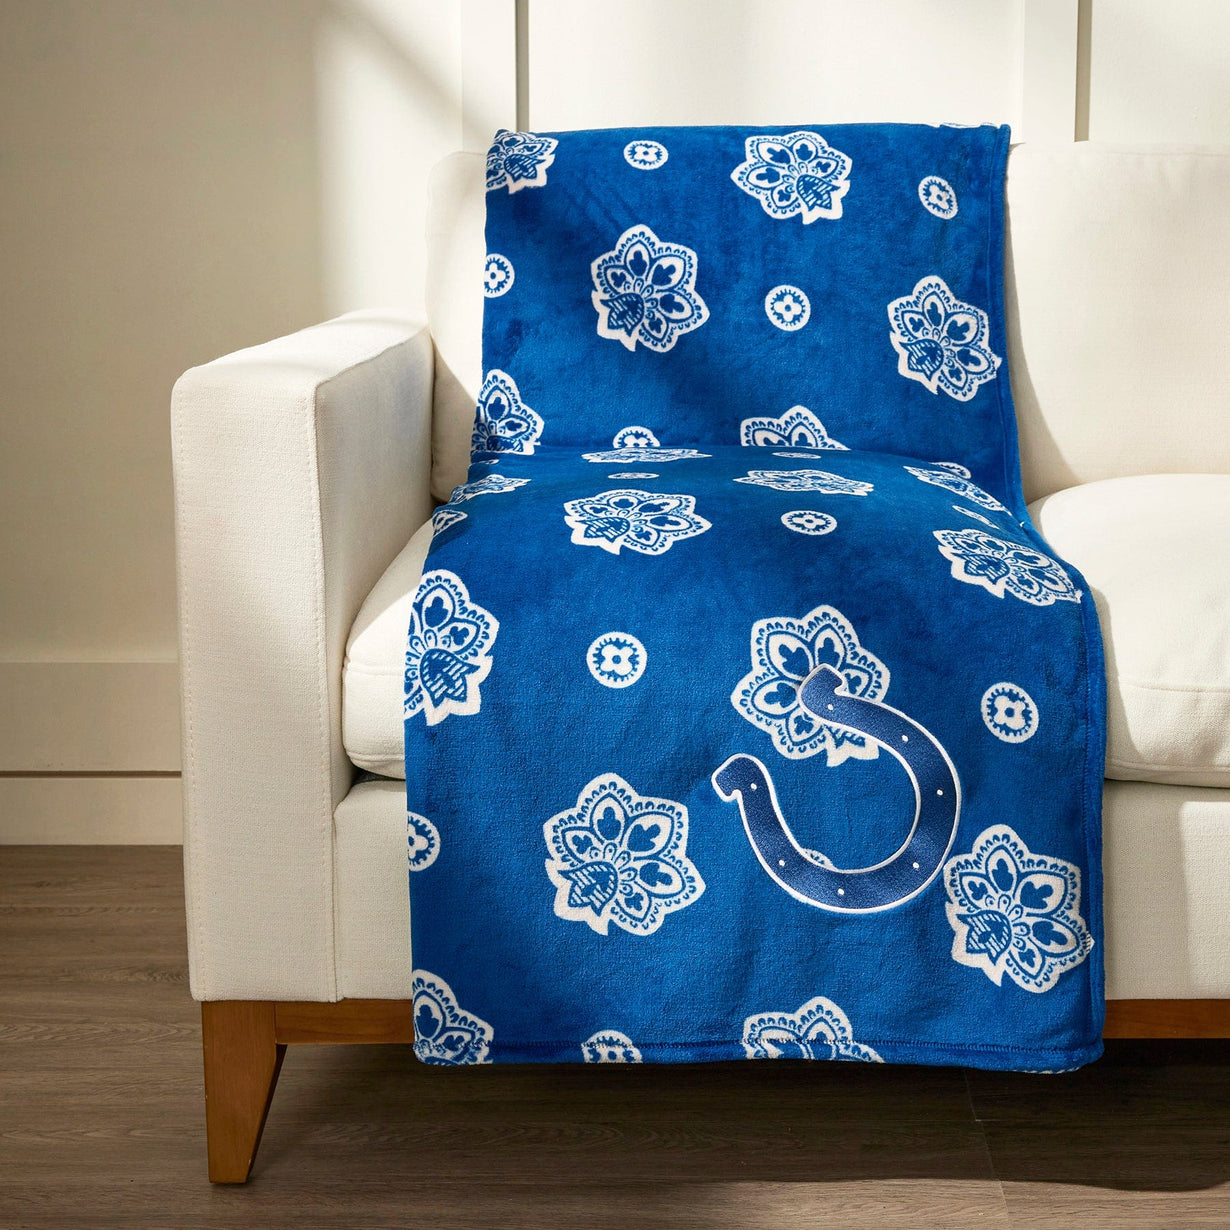 Blue fleece blanket with Indianapolis Colts logo draped across beige chair